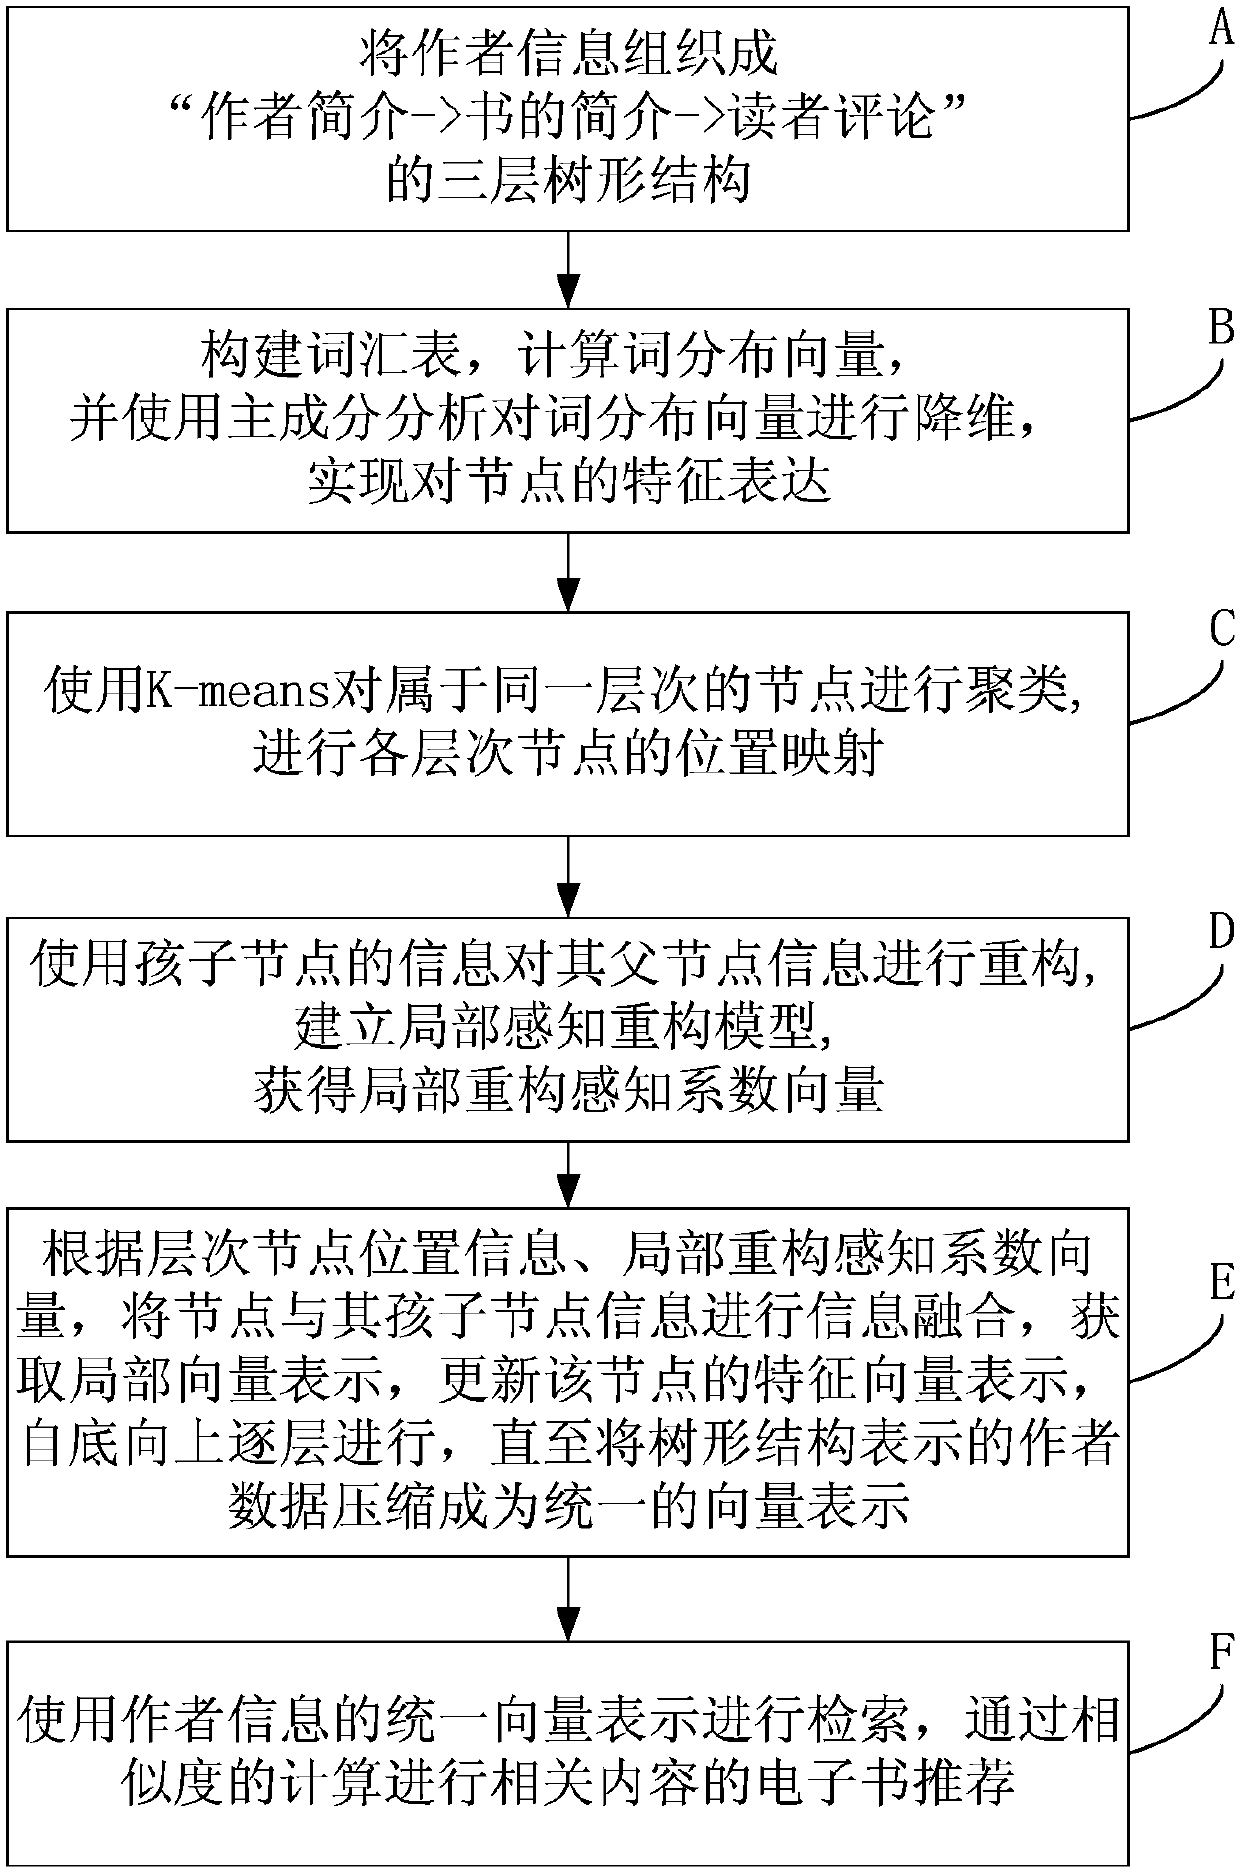 Clustering algorithm and local sensing reconstruction model-based author recommendation method and system